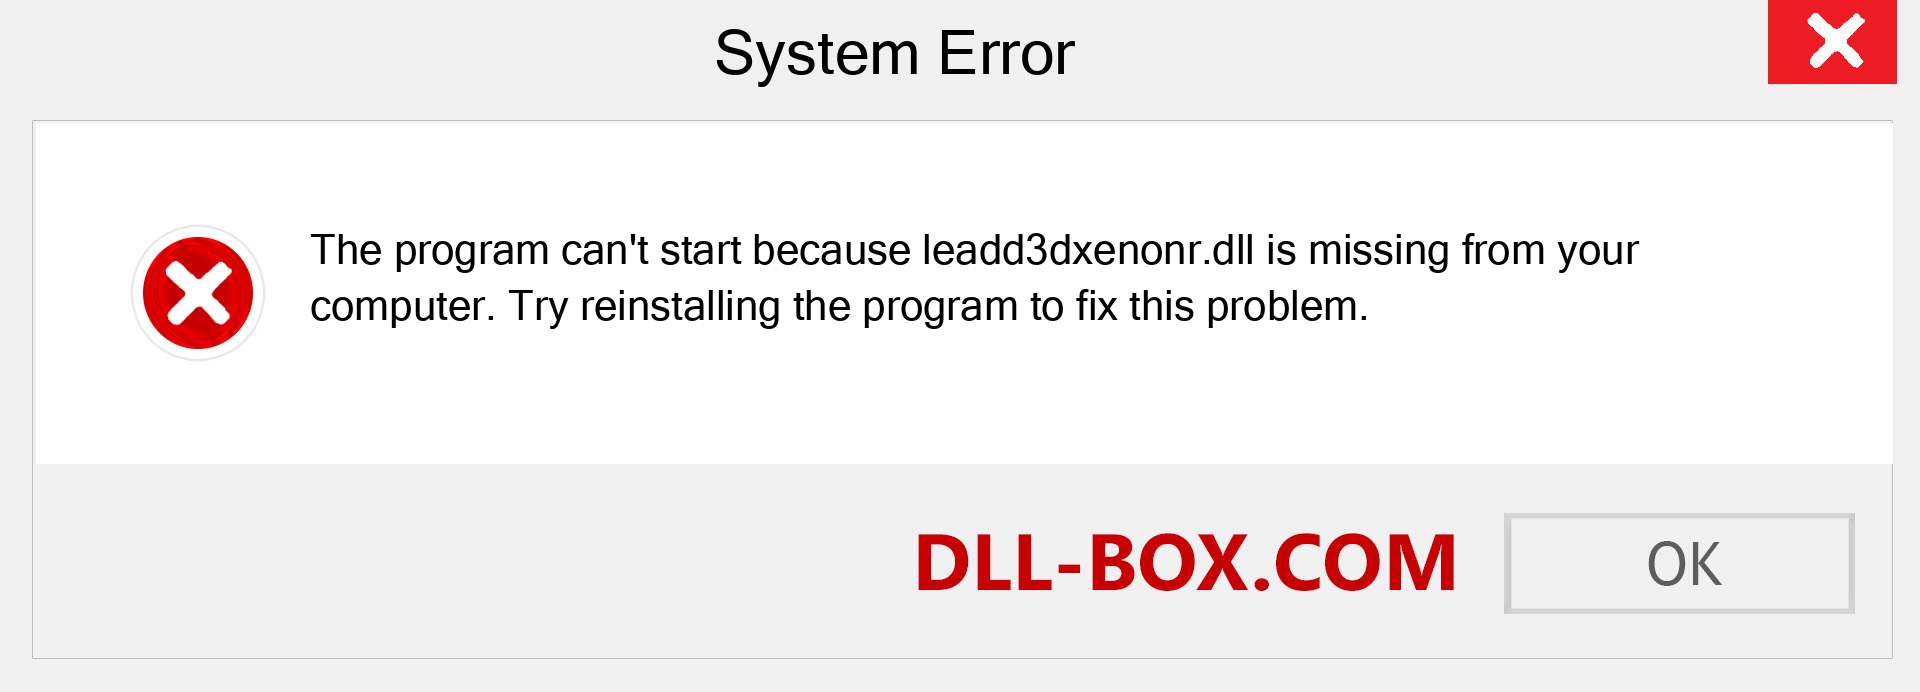  leadd3dxenonr.dll file is missing?. Download for Windows 7, 8, 10 - Fix  leadd3dxenonr dll Missing Error on Windows, photos, images